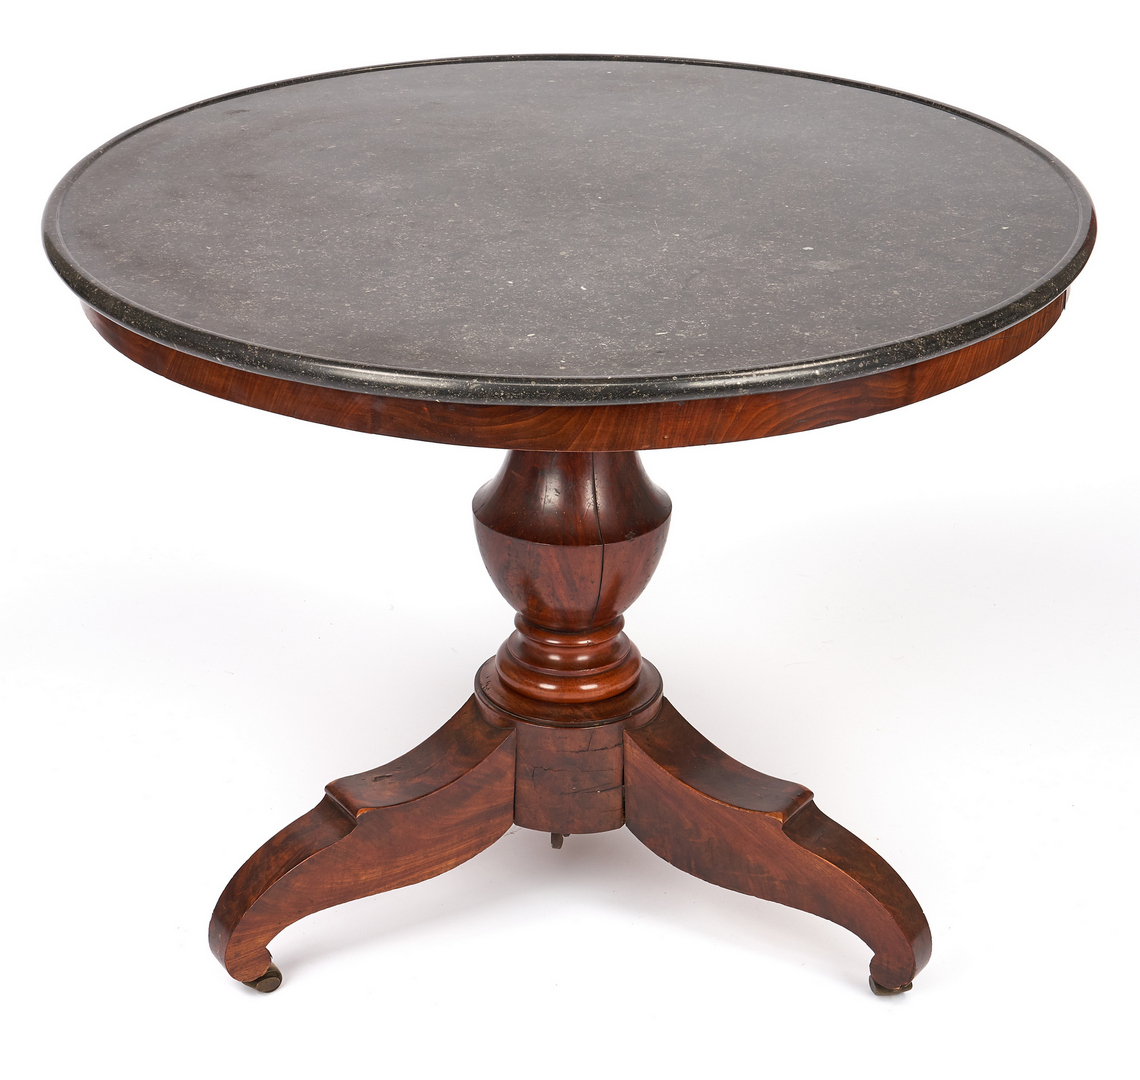 Lot 345: American Classical Center Table